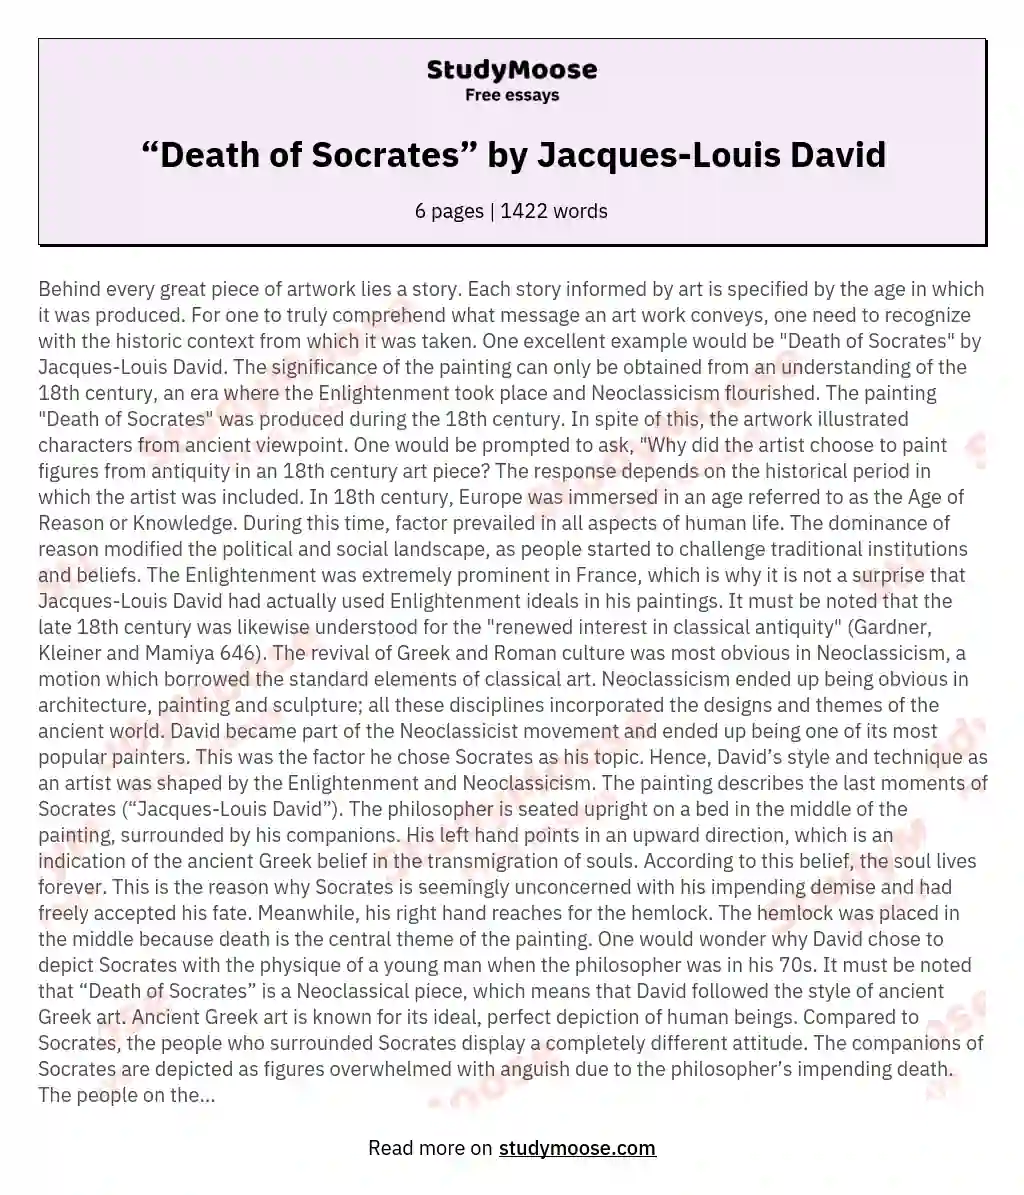 “Death of Socrates” by Jacques-Louis David essay